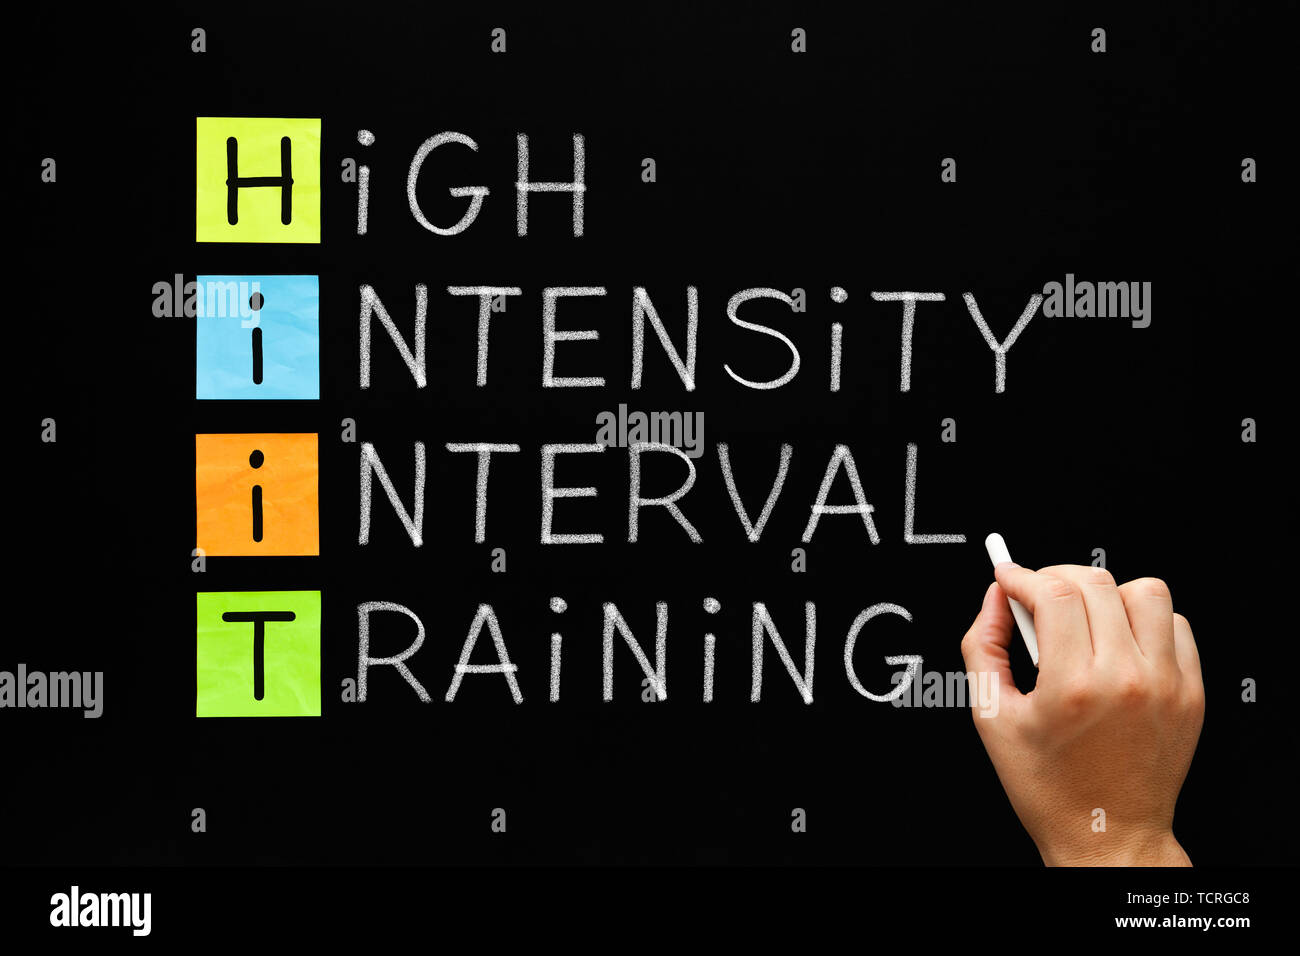 Hand writing fitness workout acronym HIIT - High Intensity Interval Training with white chalk on blackboard. Stock Photo